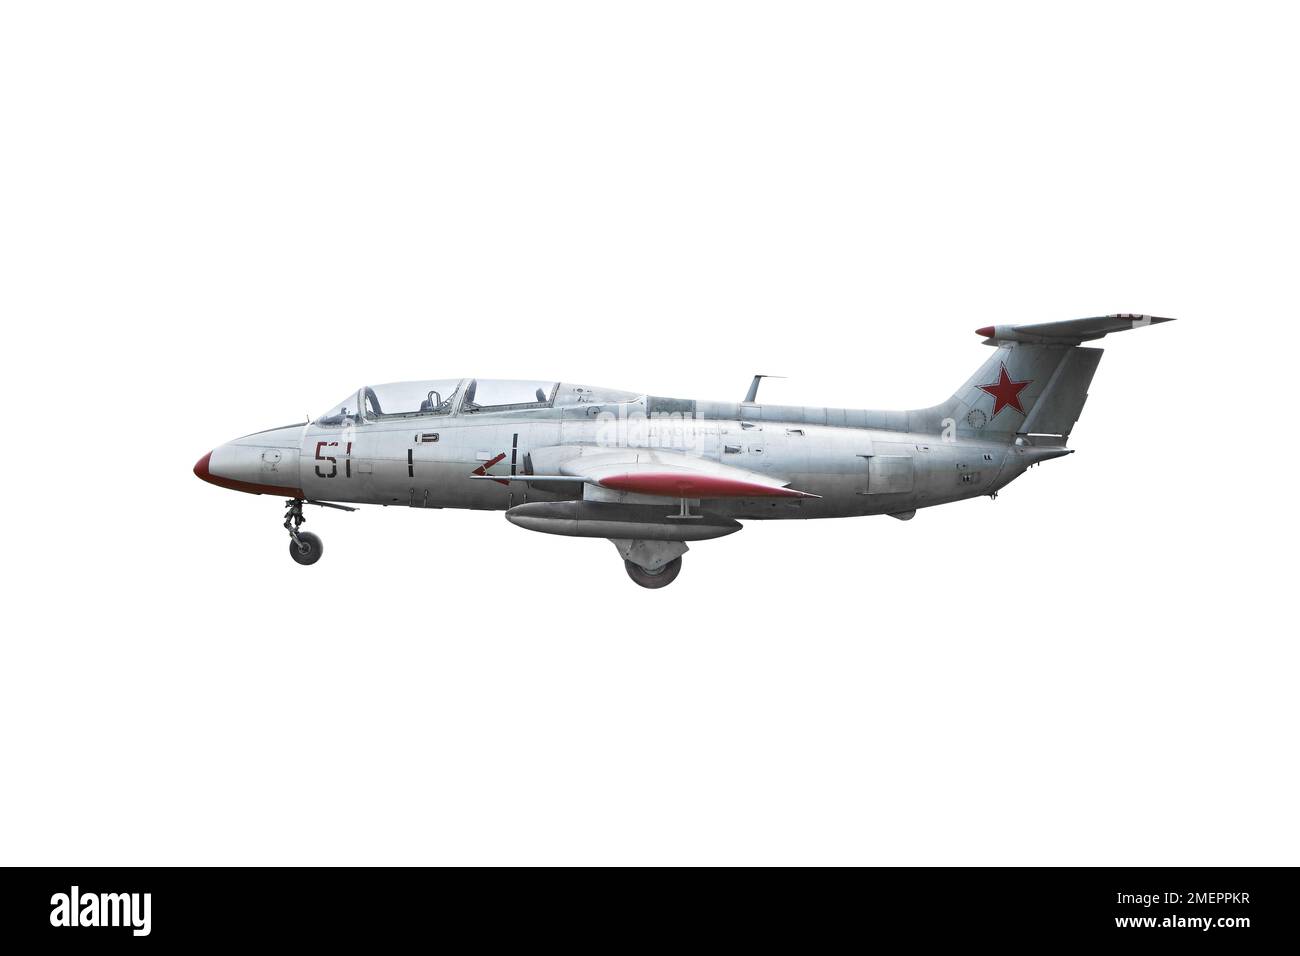 Aero L-29 Delfin military jet T'ainer aircraft, side view Stock Photo